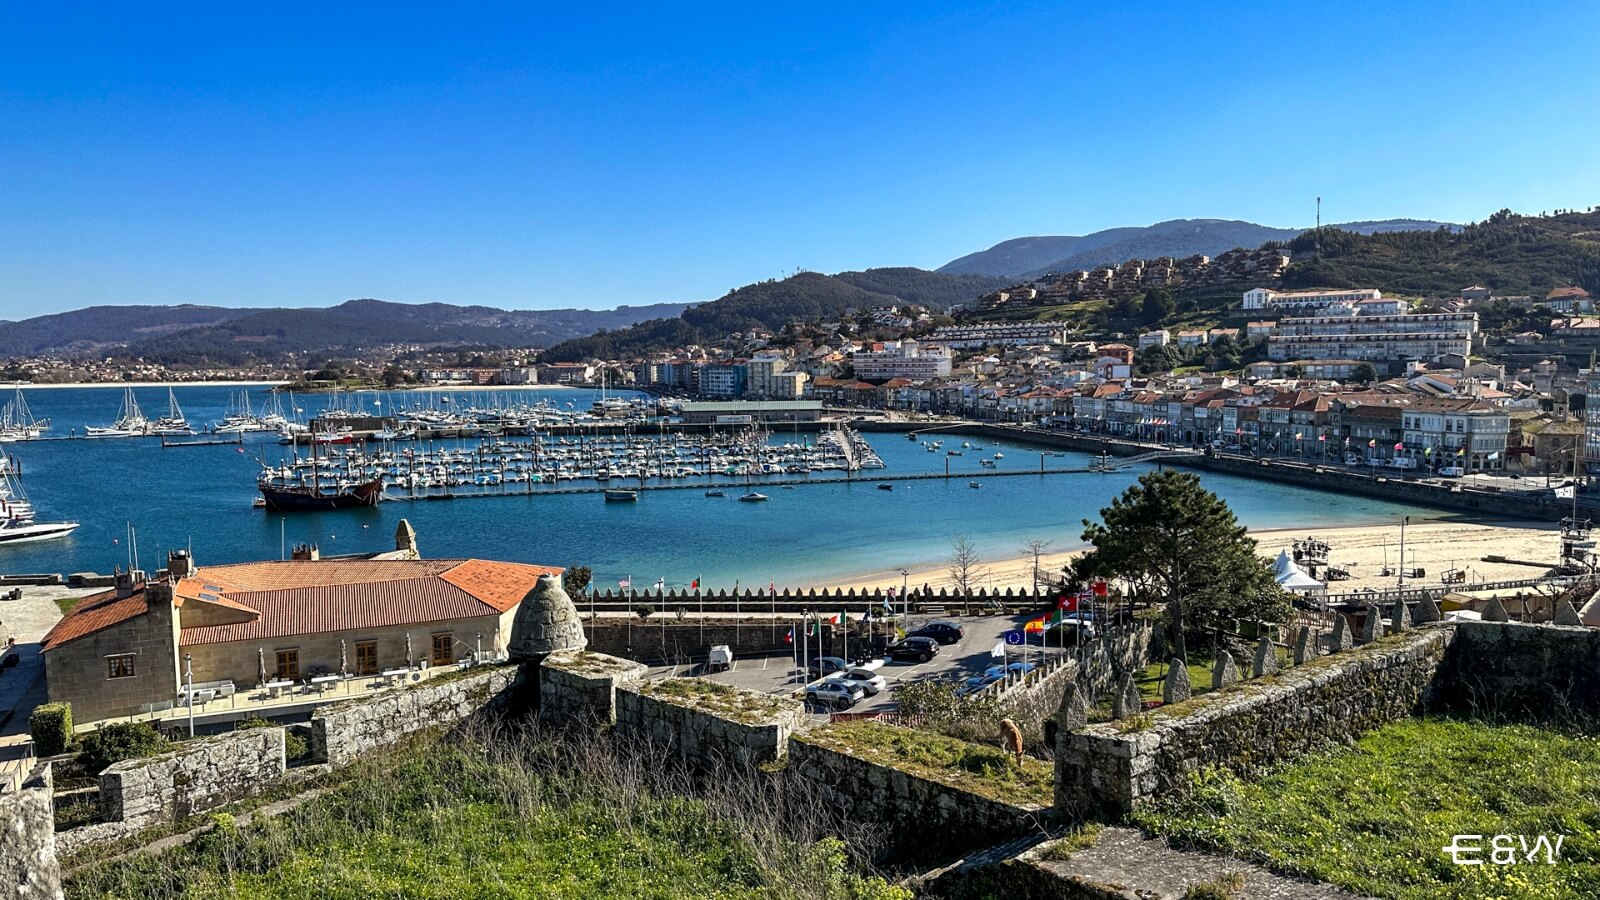 The 8 best places to visit in Galicia - 7. Baiona